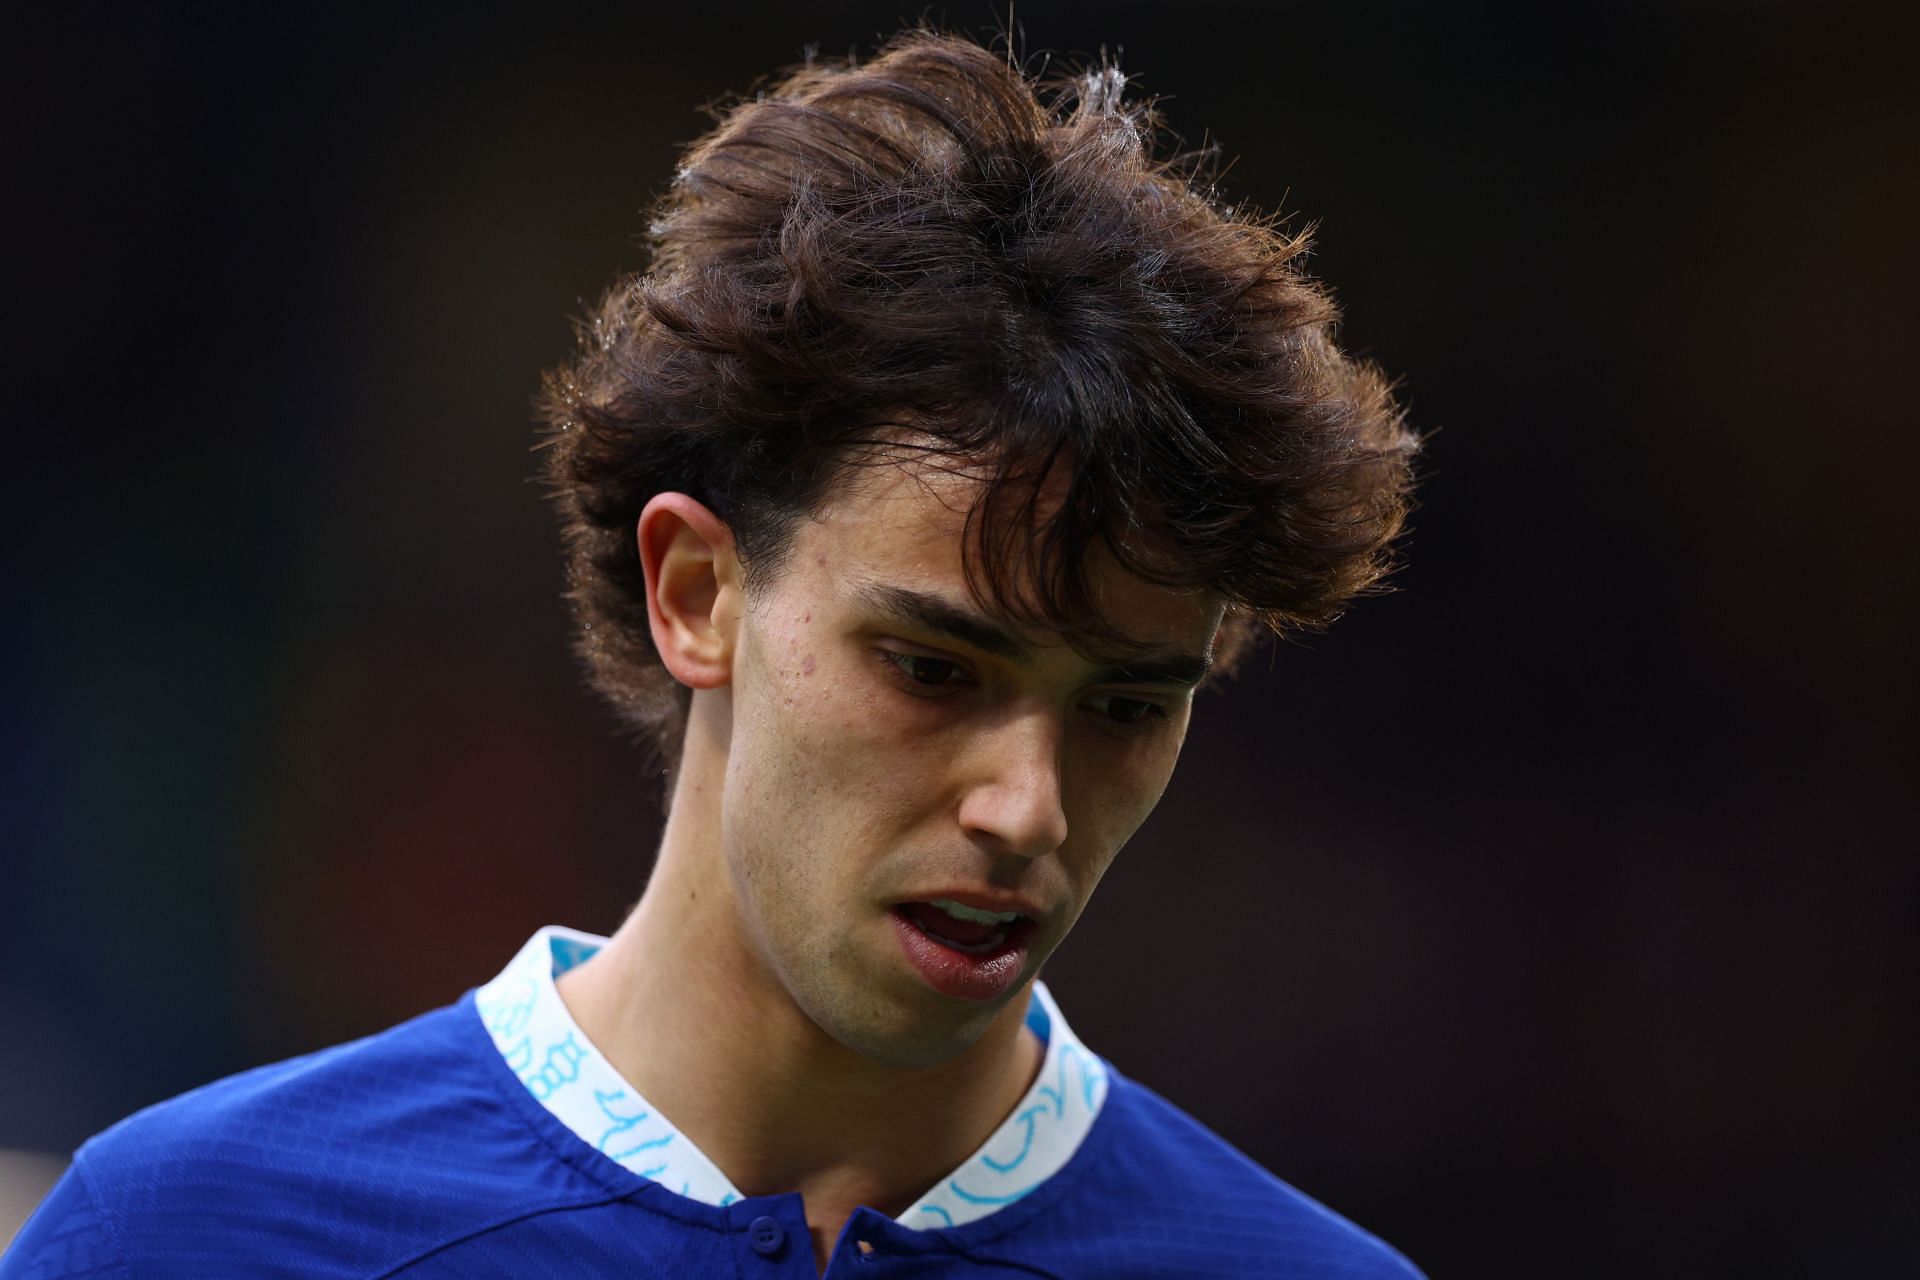 “Totally respectable” - Atletico Madrid star believes Joao Felix will return to club after Chelsea loan spell